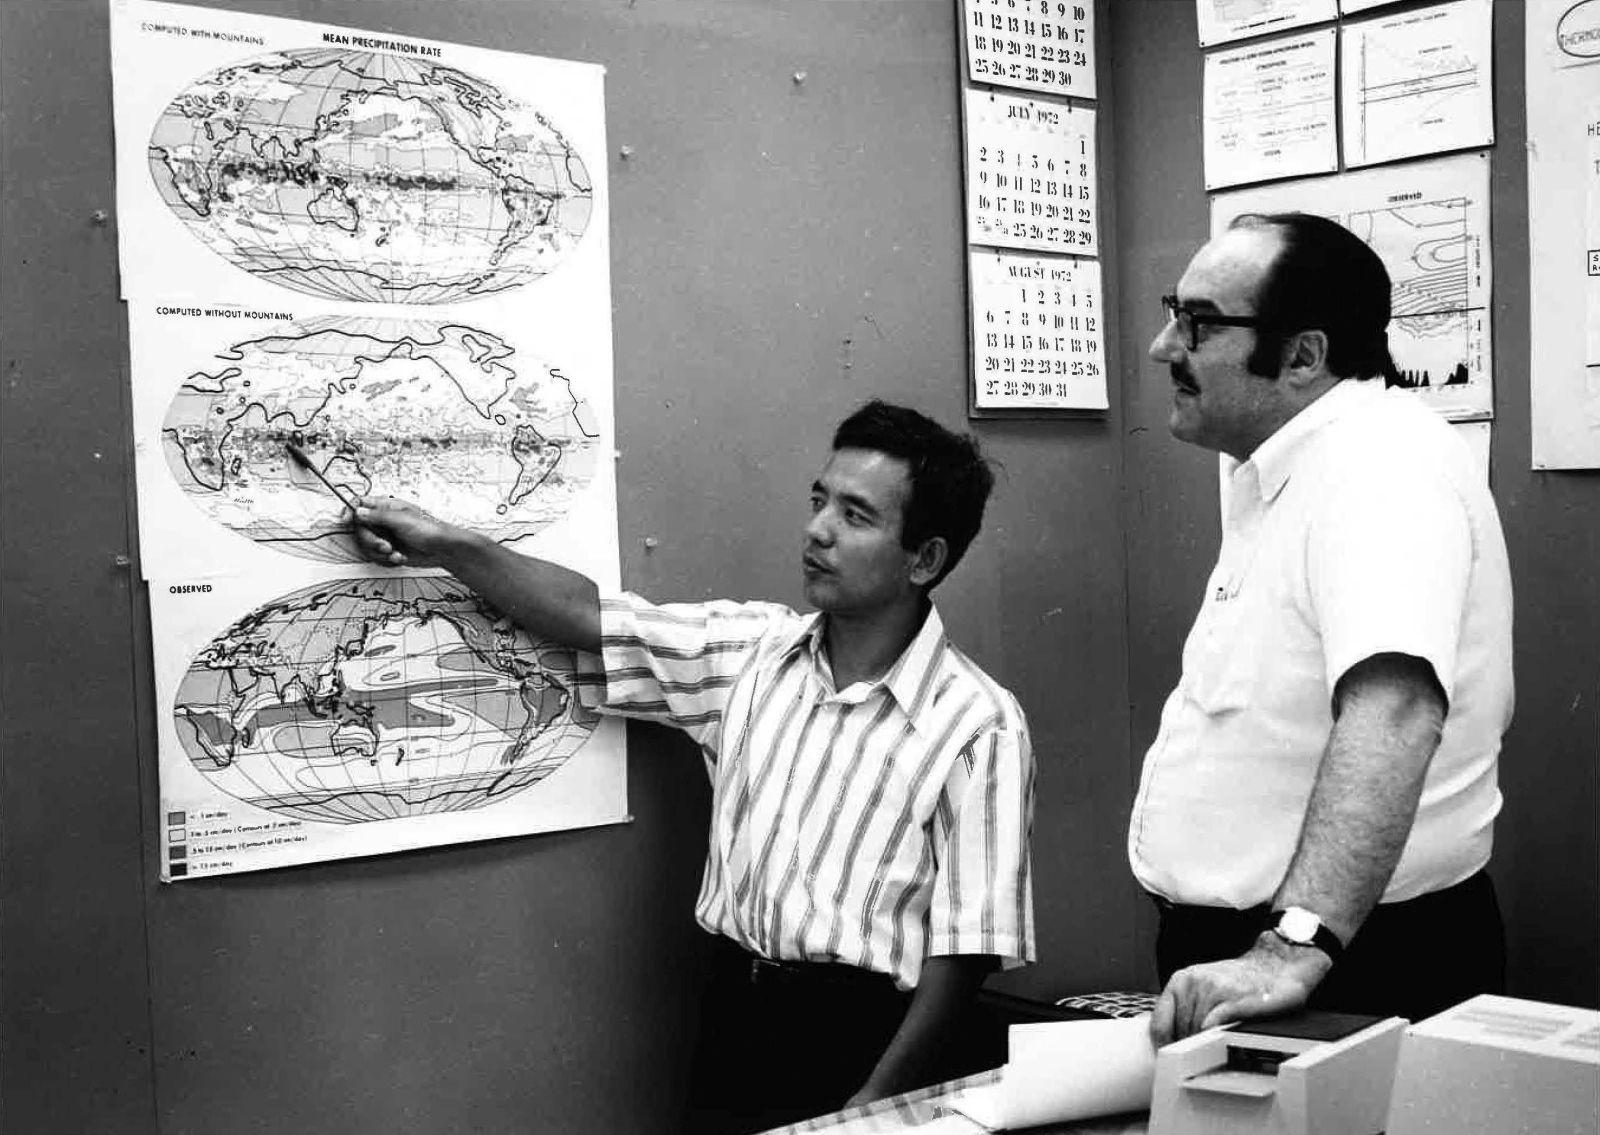 epa09507303 (FILE) - An undated handout photo Courtesy of Geophysical Fluid Dynamics Laboratory (GFDL) shows Japan-born US researcher and 2021 Nobel laureate in Physics, Syukuro Manabe (L) together with late US meteorologist Joseph Smagorinsky at an undisclosed location, issued 05 October 2021. Syukuro Manabe, Klaus Hasselmann and Giorgio Parisi were awarded with the 2021 Nobel Prize in Physics for their 'groundbreaking contributions to our understanding of complex physical systems', the Nobel Committee said.  EPA/Geophysical Fluid Dynamics Laboratory HANDOUT  HANDOUT EDITORIAL USE ONLY/NO SALES